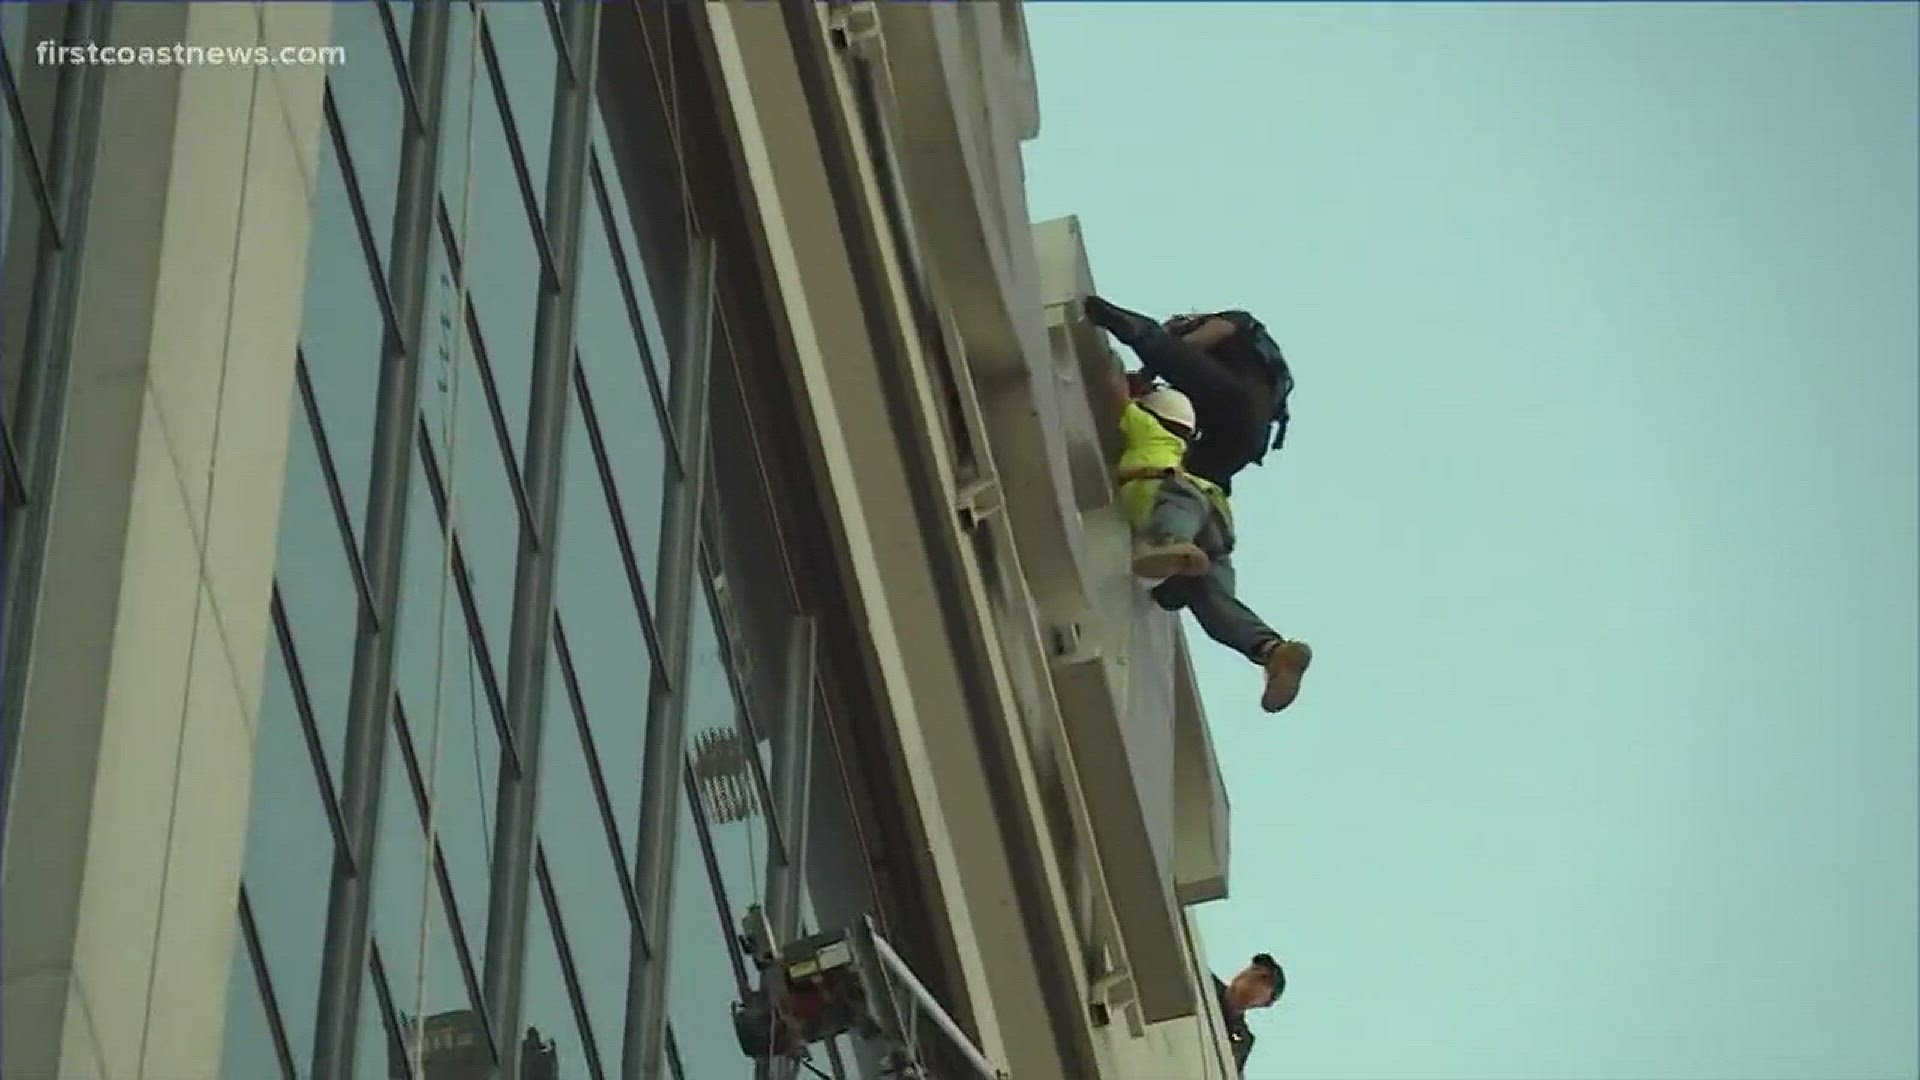 JFRD rescued two window washers from some scaffolding at the BB&T building in downtown Jacksonville.